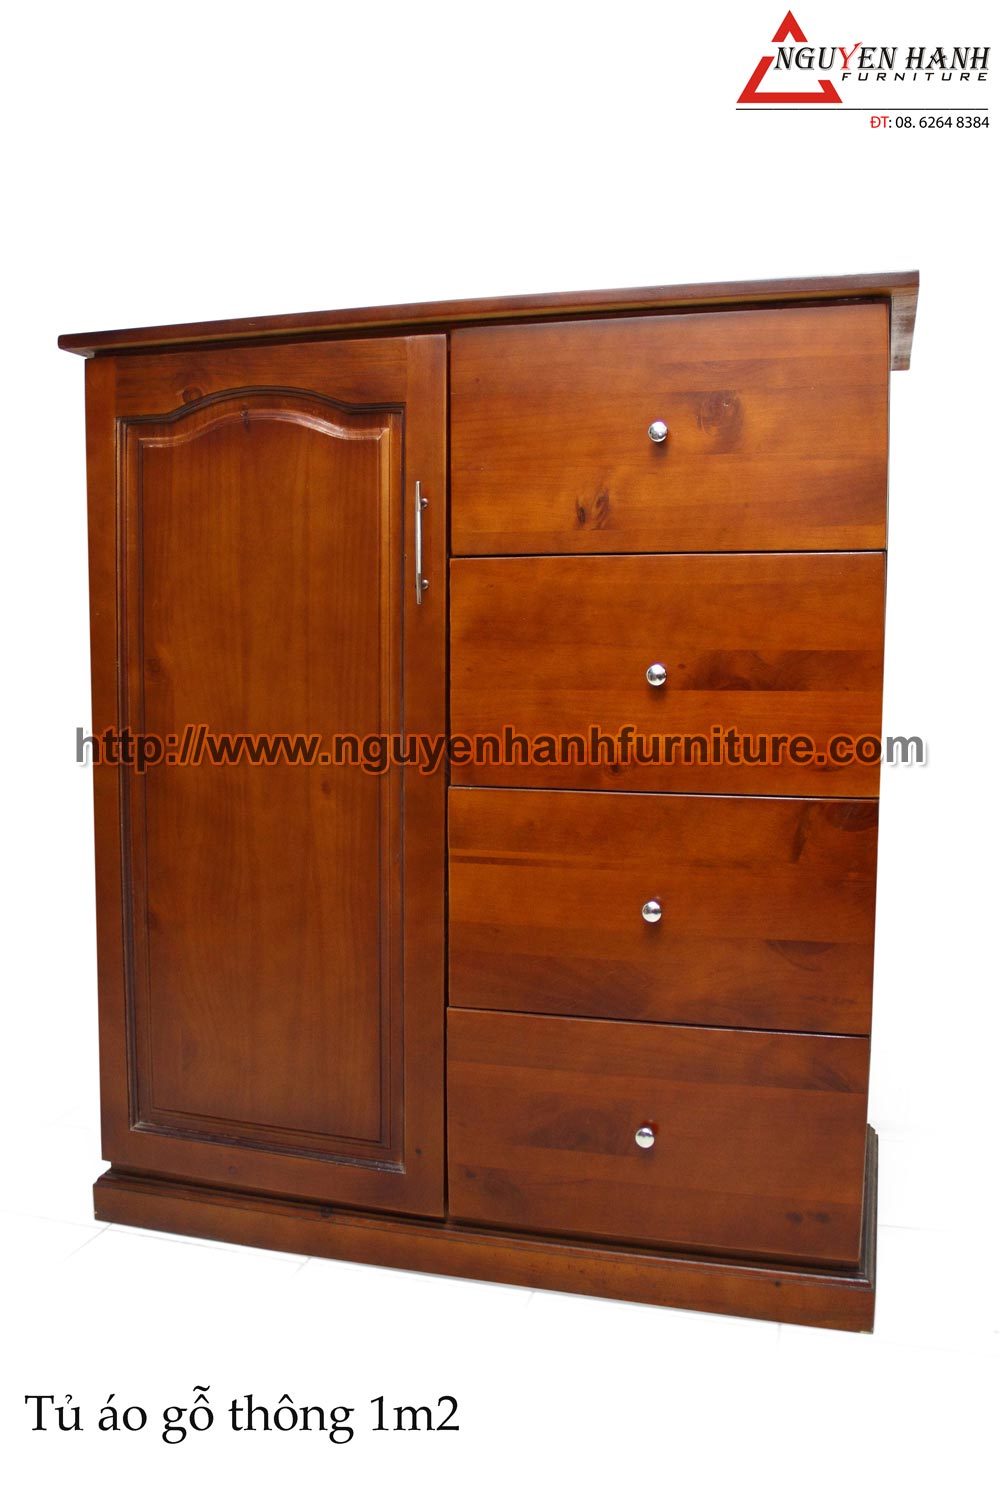 Name product: T1m2 brown Wardrobe with drawers